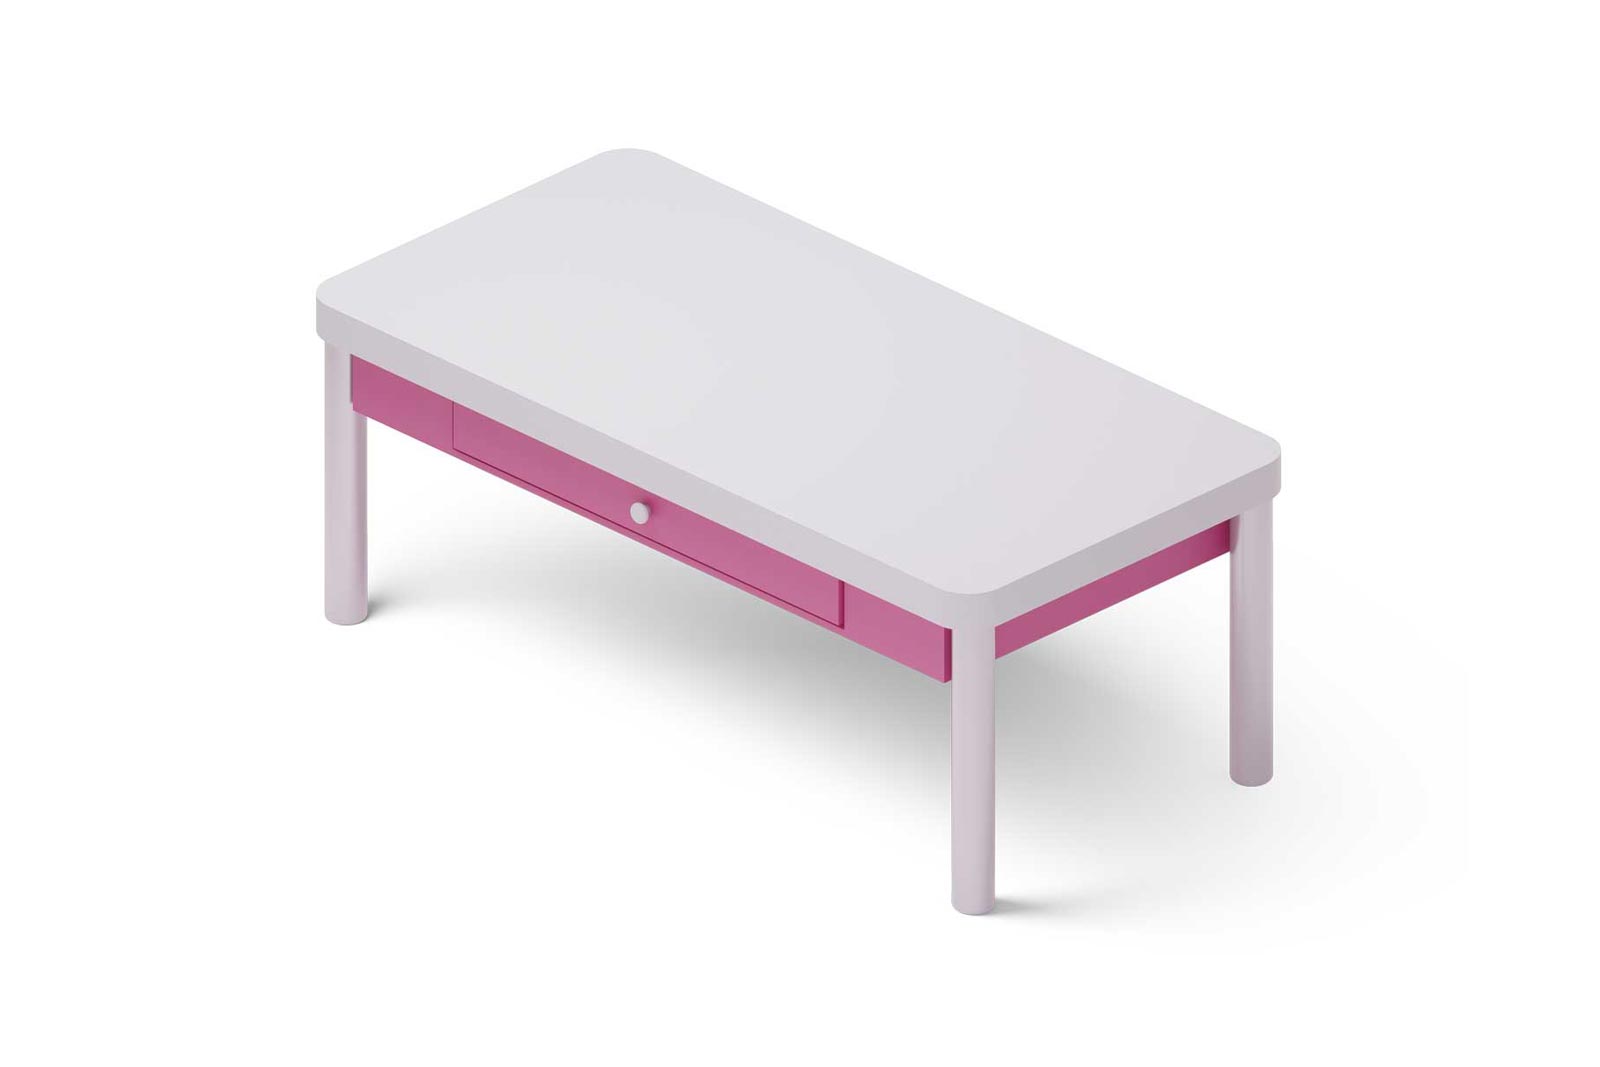 White coffee table with pink drawer 3d illustration. Low stylish table in simple modern style for interior design, living room, reception or lounge